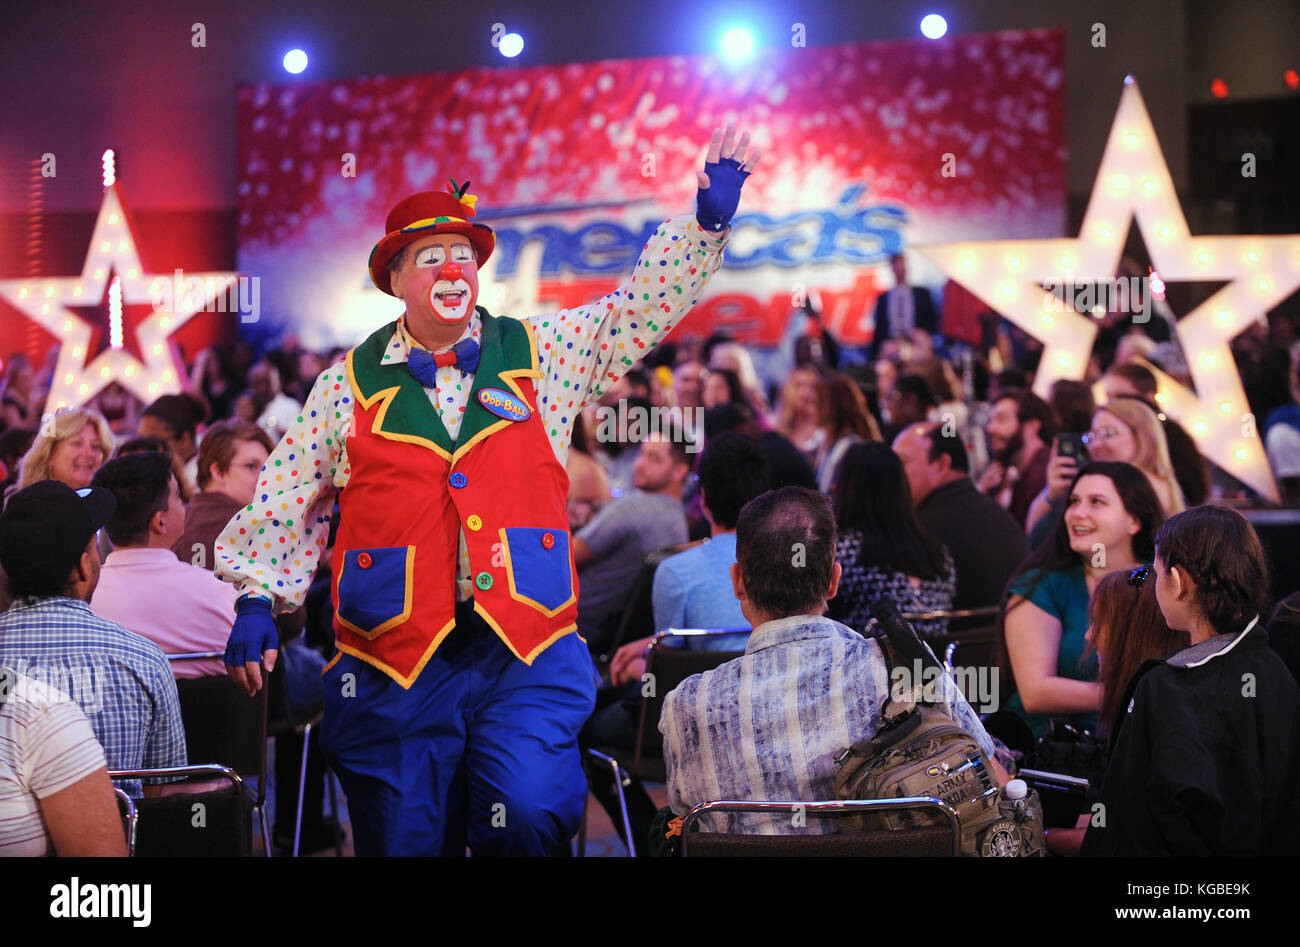 Orlando, United States. 05th Nov, 2017. November 5, 2017- Orlando, Florida, United States- Oddball the Magic Clown (Donald Carpenter) entertains the crowd at the season 12 open call auditions for NBC's 'America's Got Talent' television show on November 5, 2017 at the Orange County Convention Center in Orlando, Florida. Orlando is the first of 10 American cities where auditions are scheduled. Credit: Paul Hennessy/Alamy Live News Stock Photo